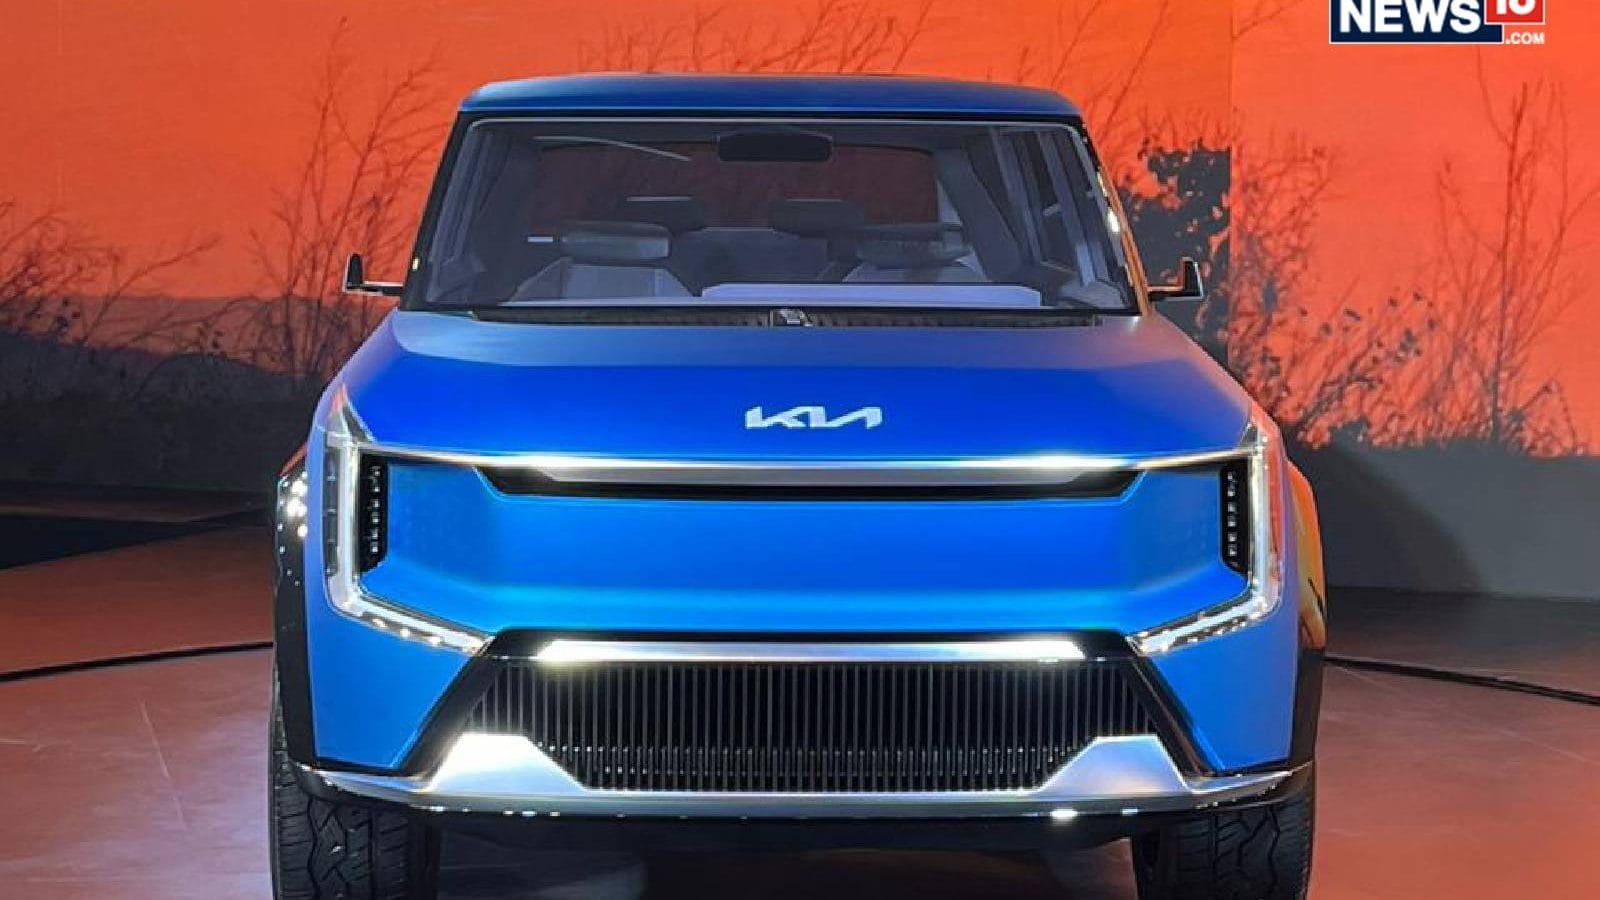 All-Electric Kia EV9 Concept in Pics: See Design, Features and More ...